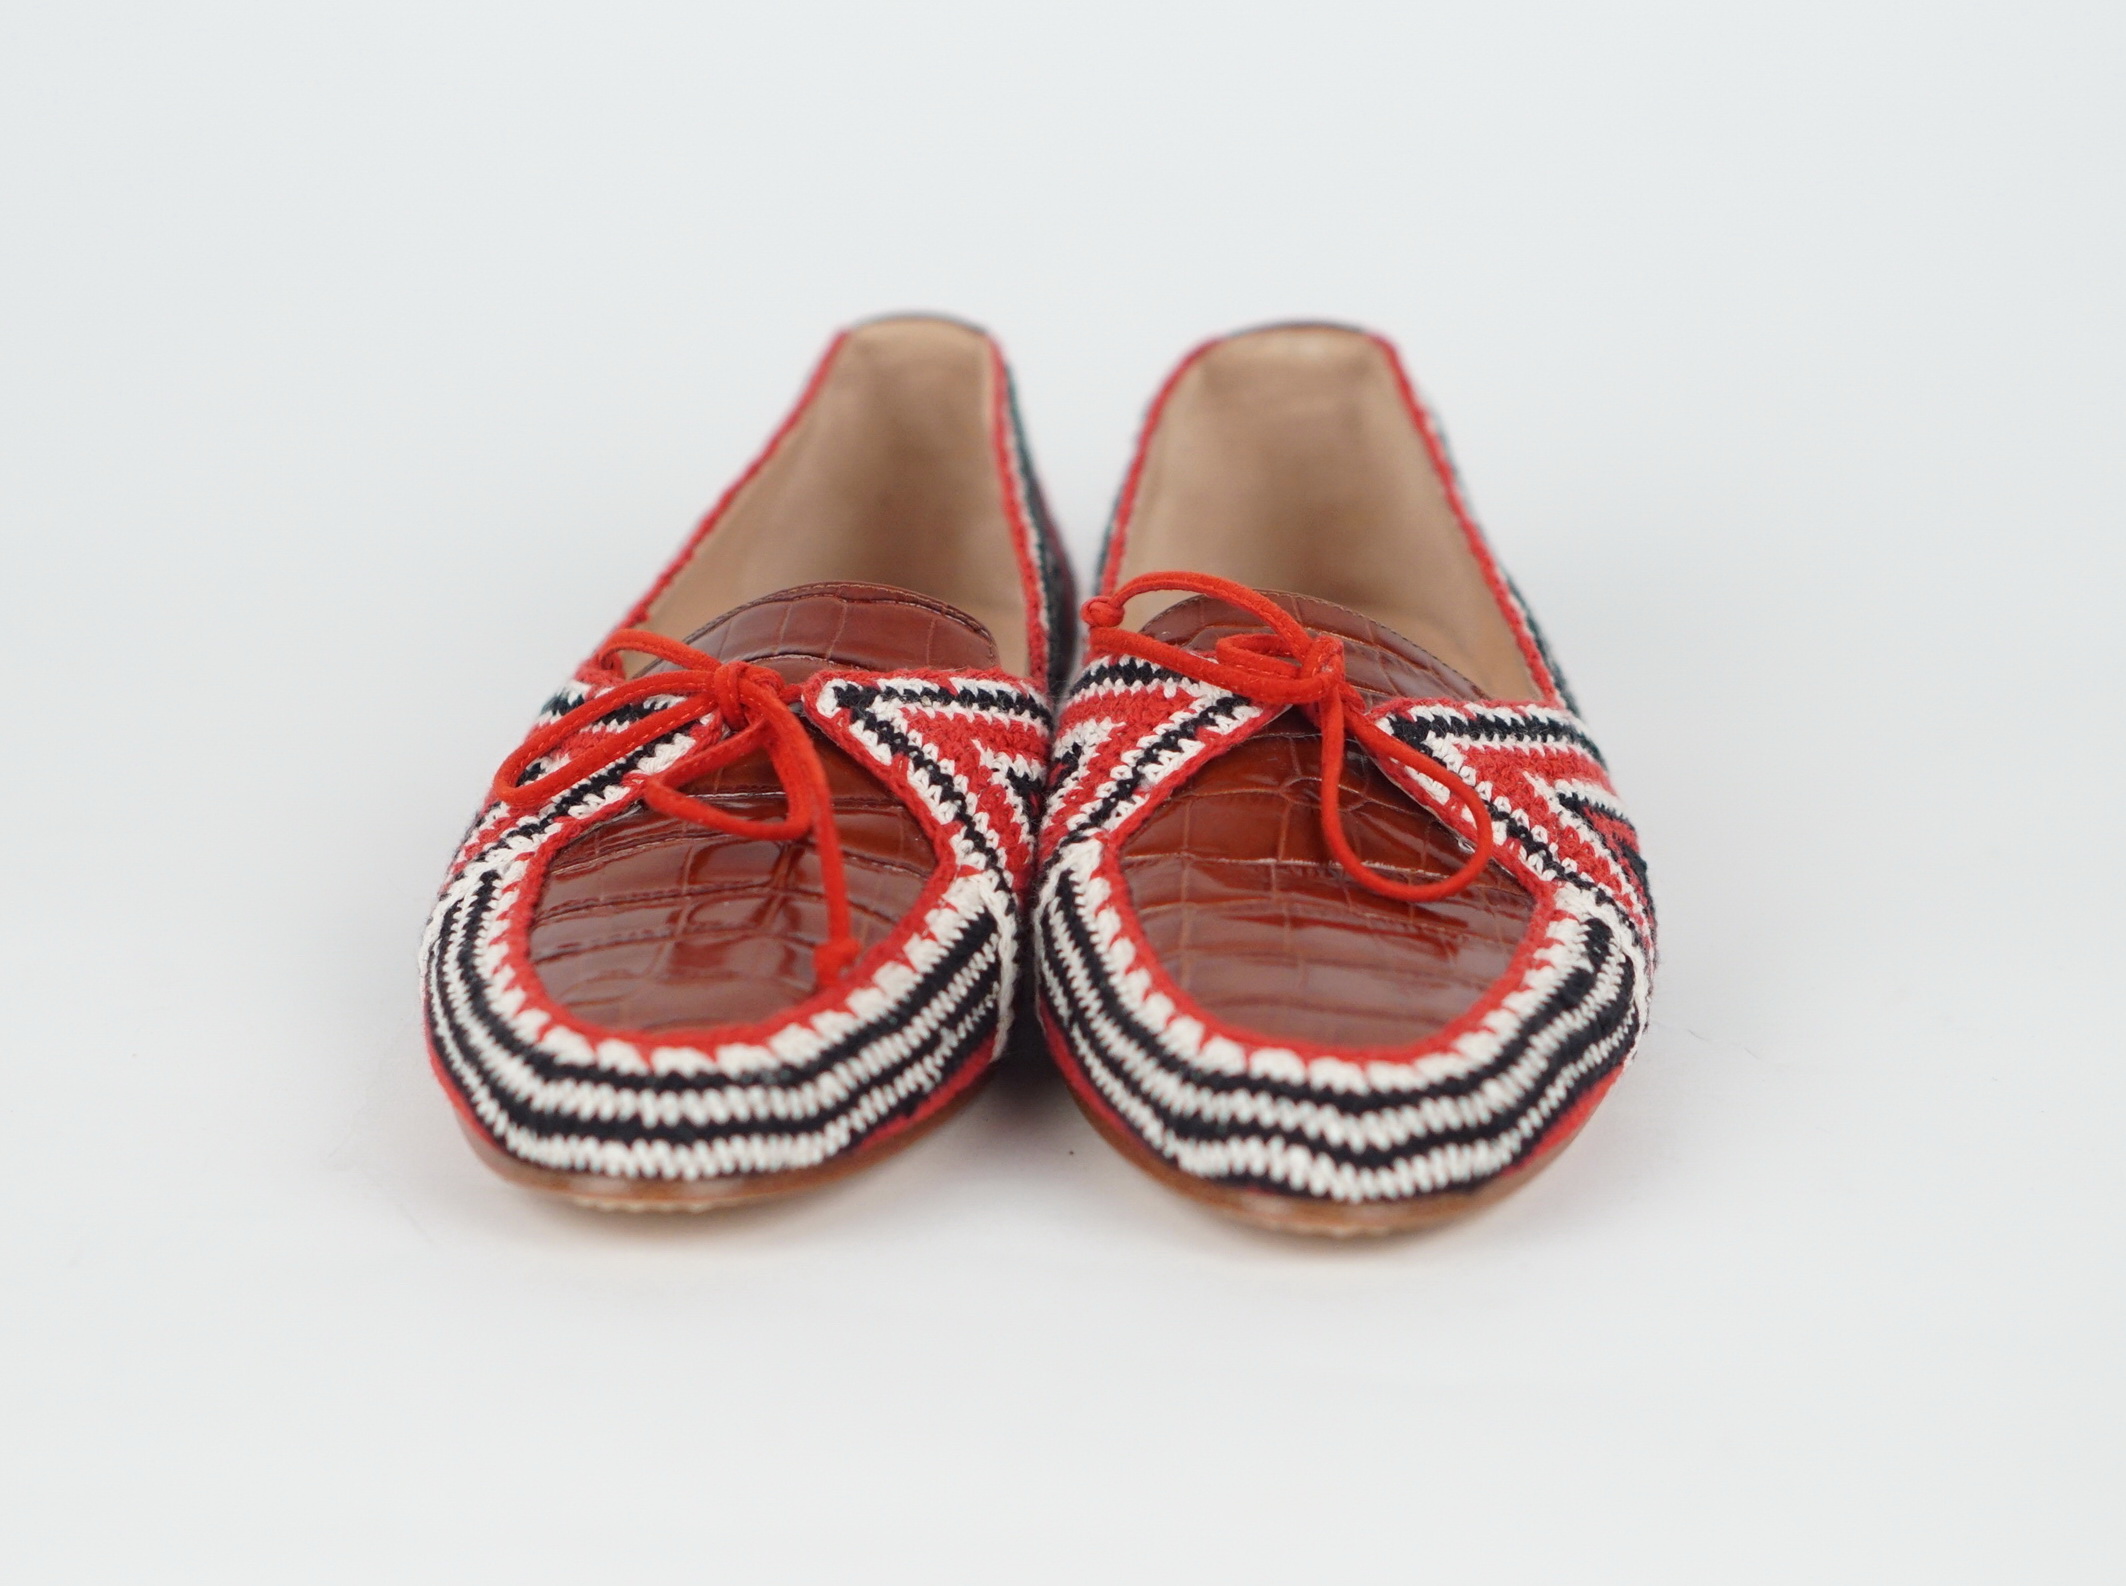 Crocheted Cotton And Leather Loafers 